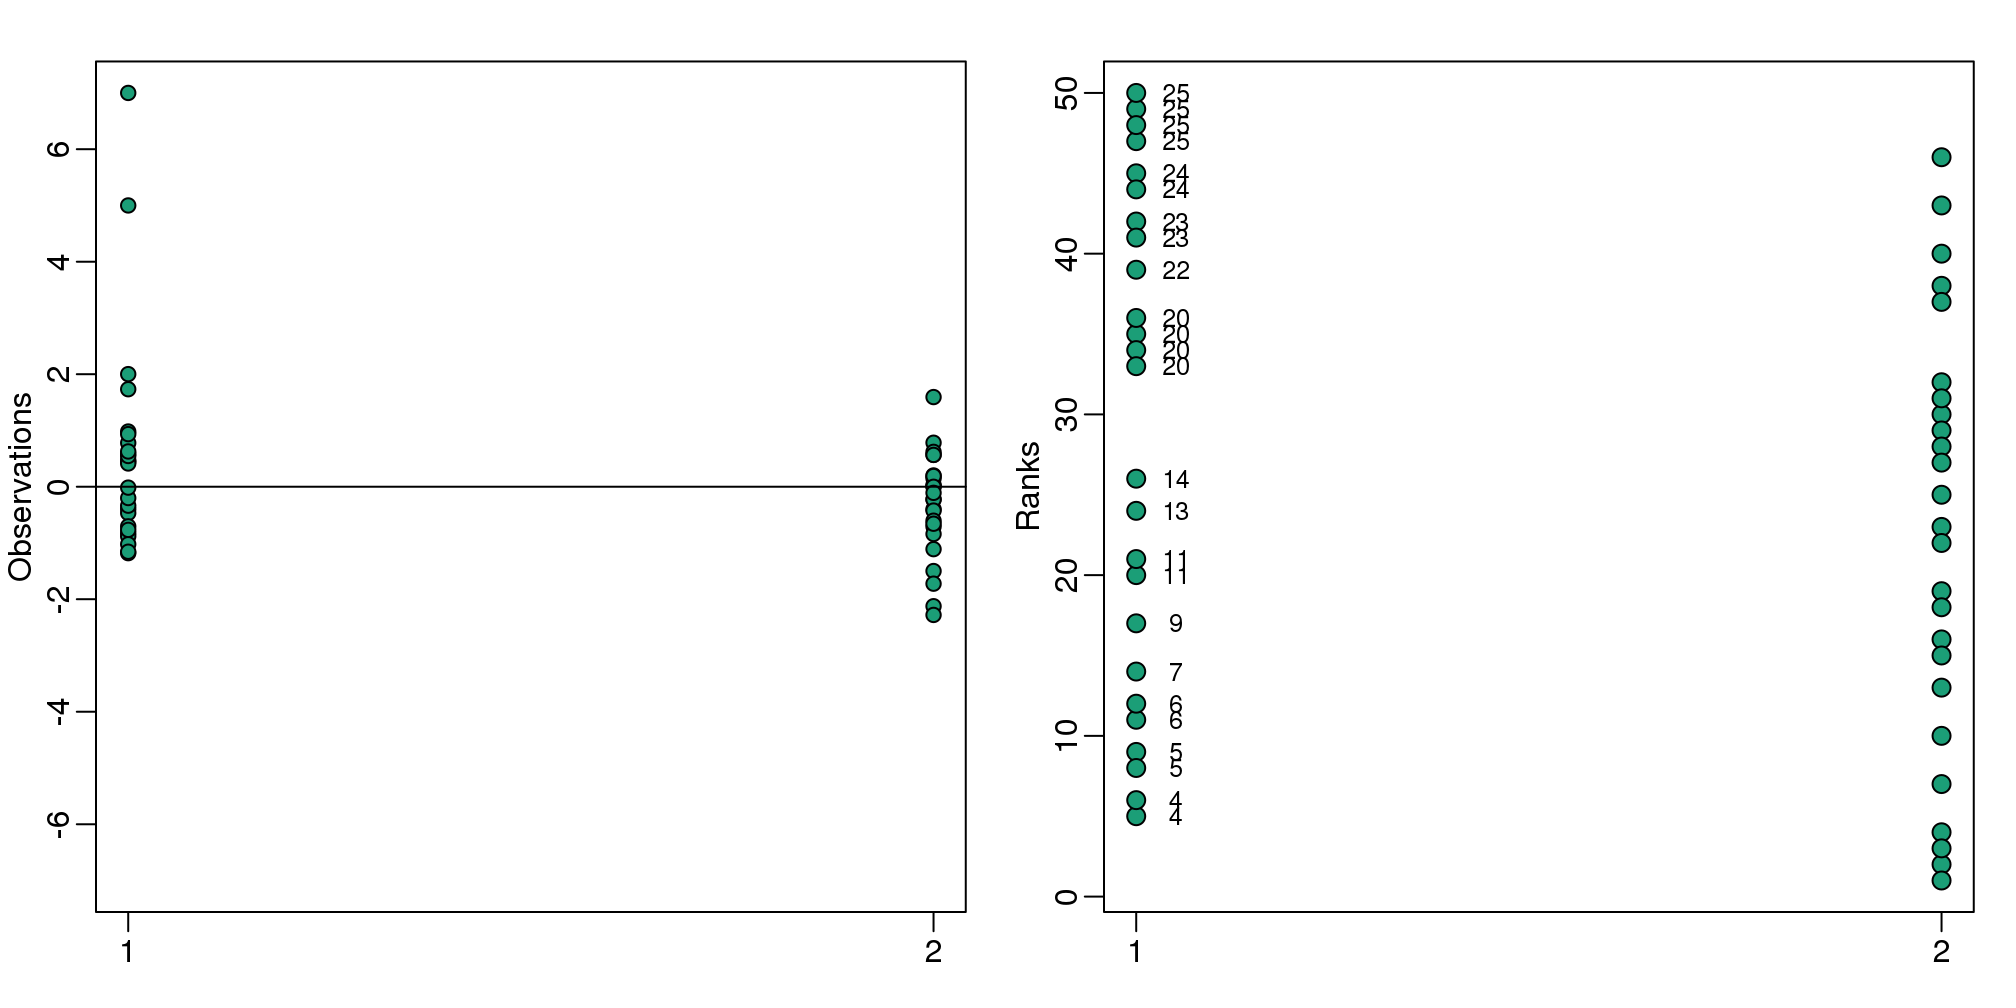 Data from two populations with two outliers. The left plot shows the original data and the right plot shows their ranks. The numbers are the w values 